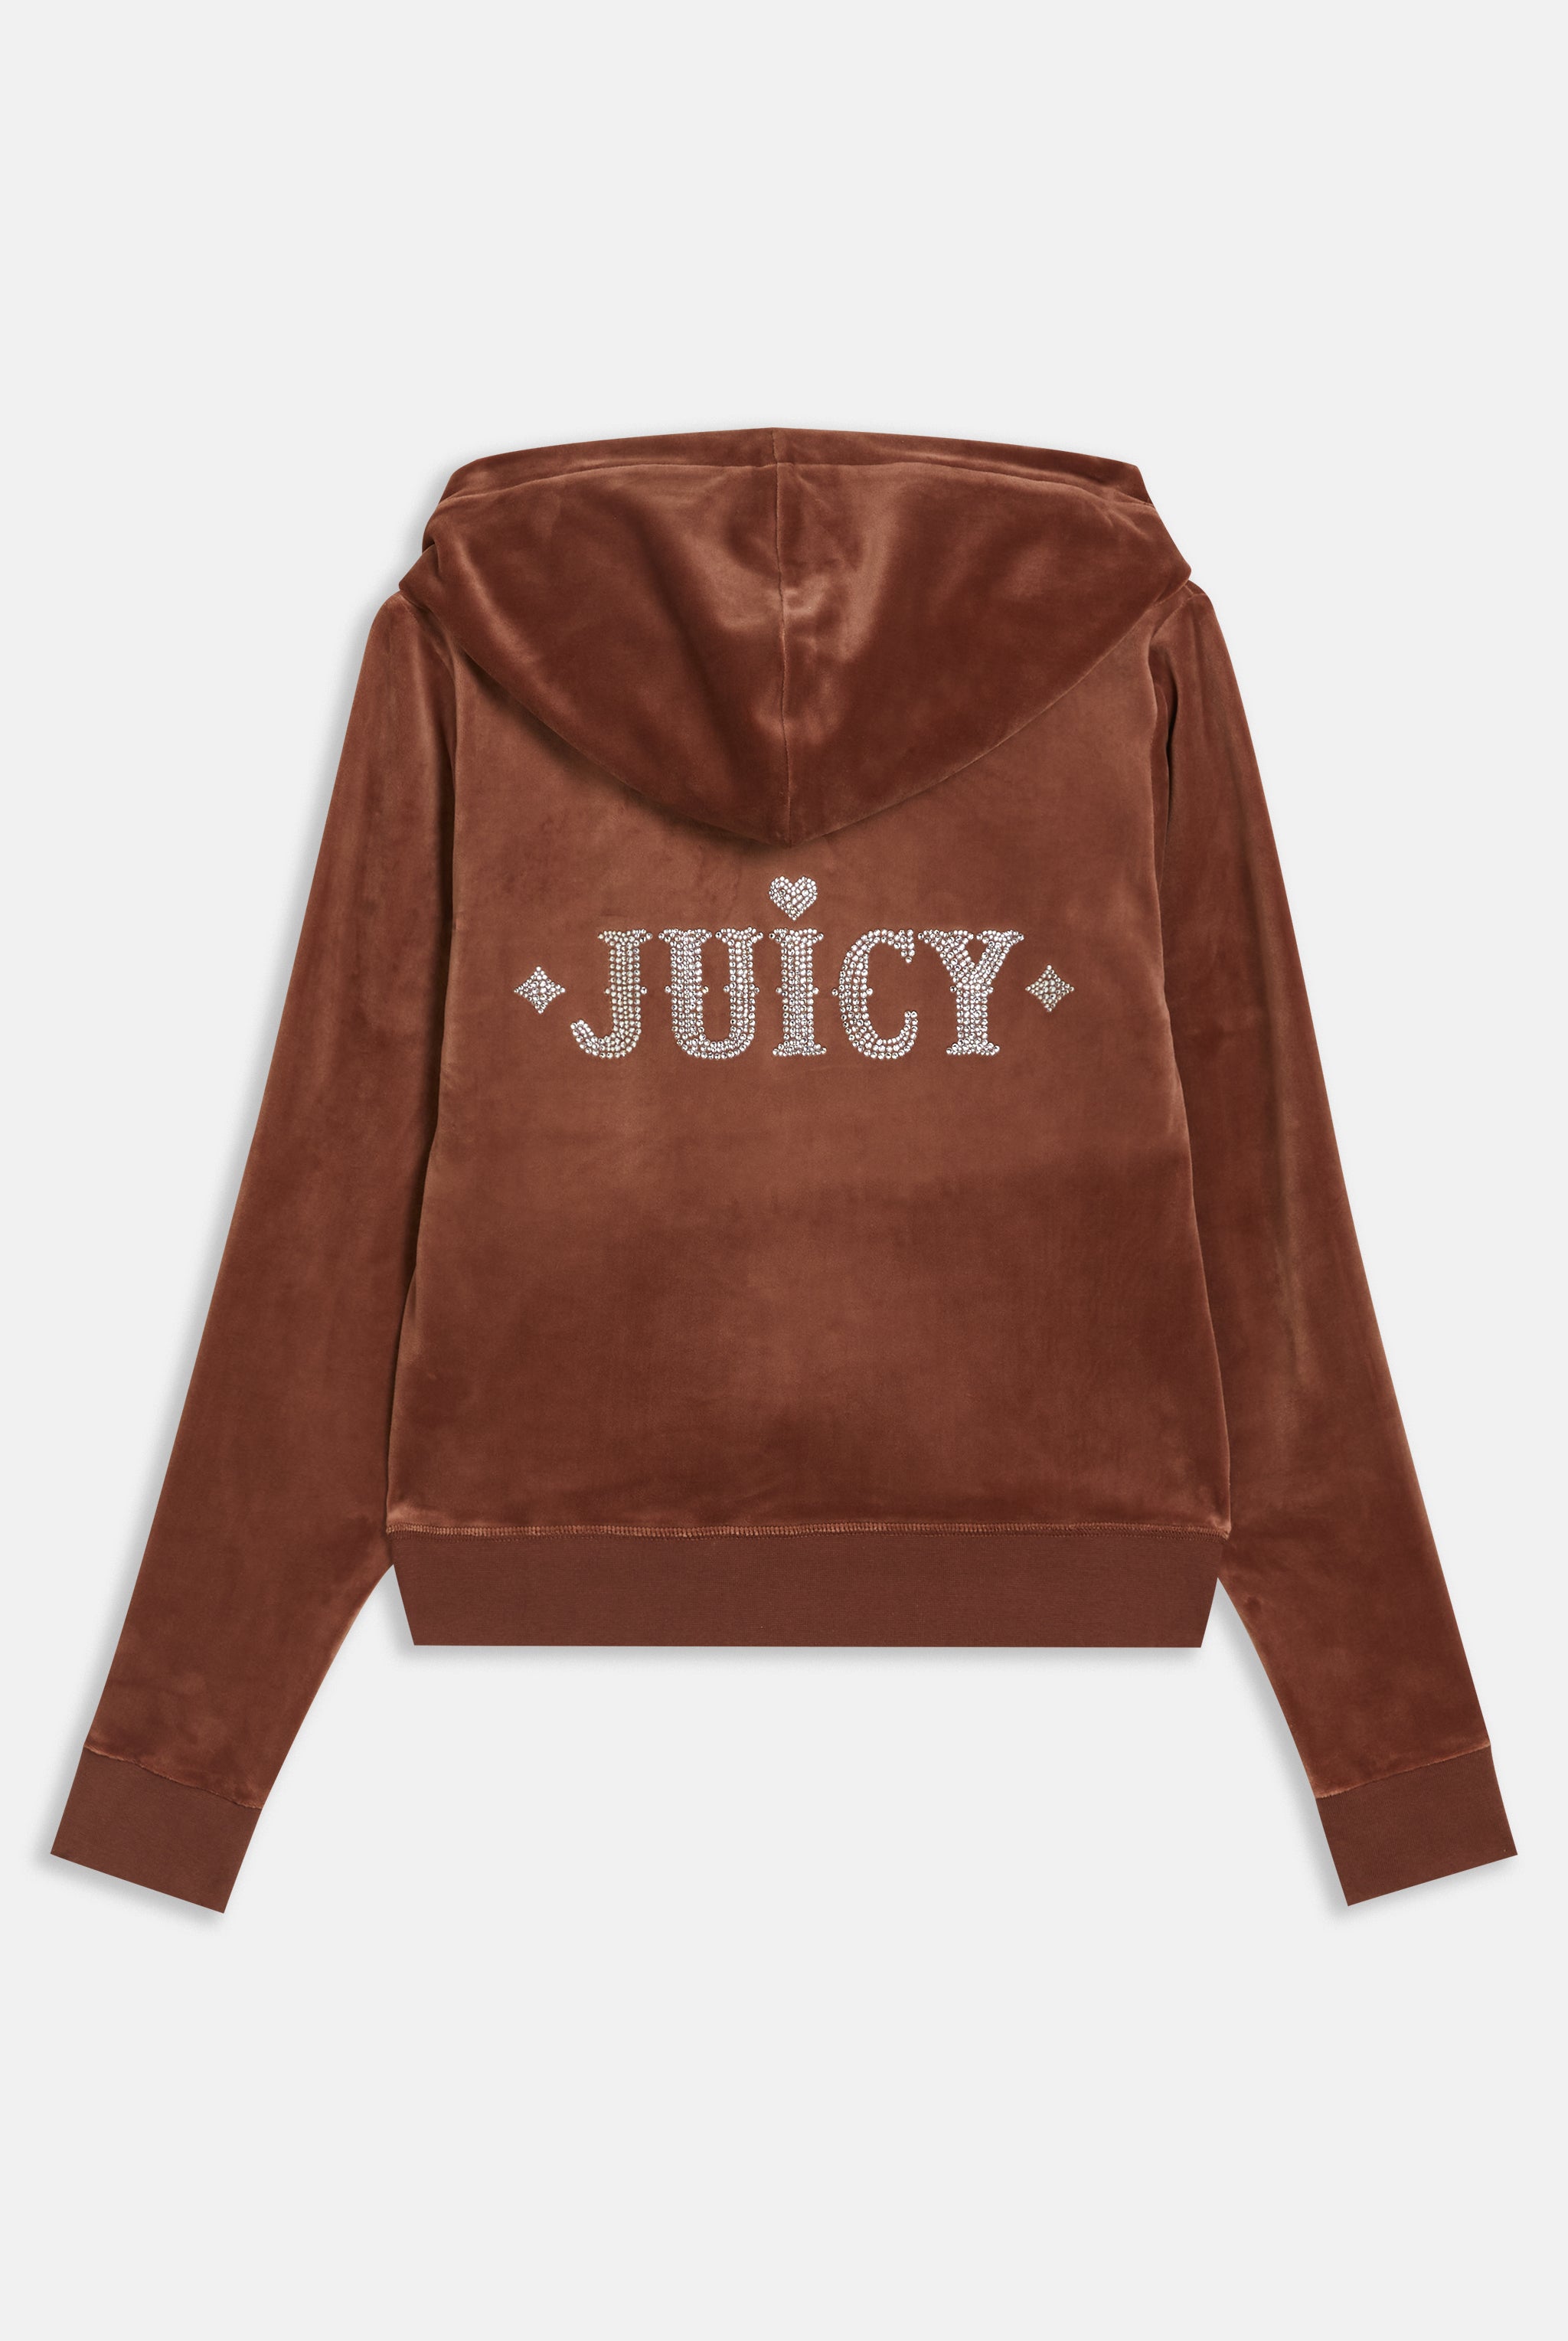 New Arrivals | JUICY COUTURE UK – Juicy Couture UK